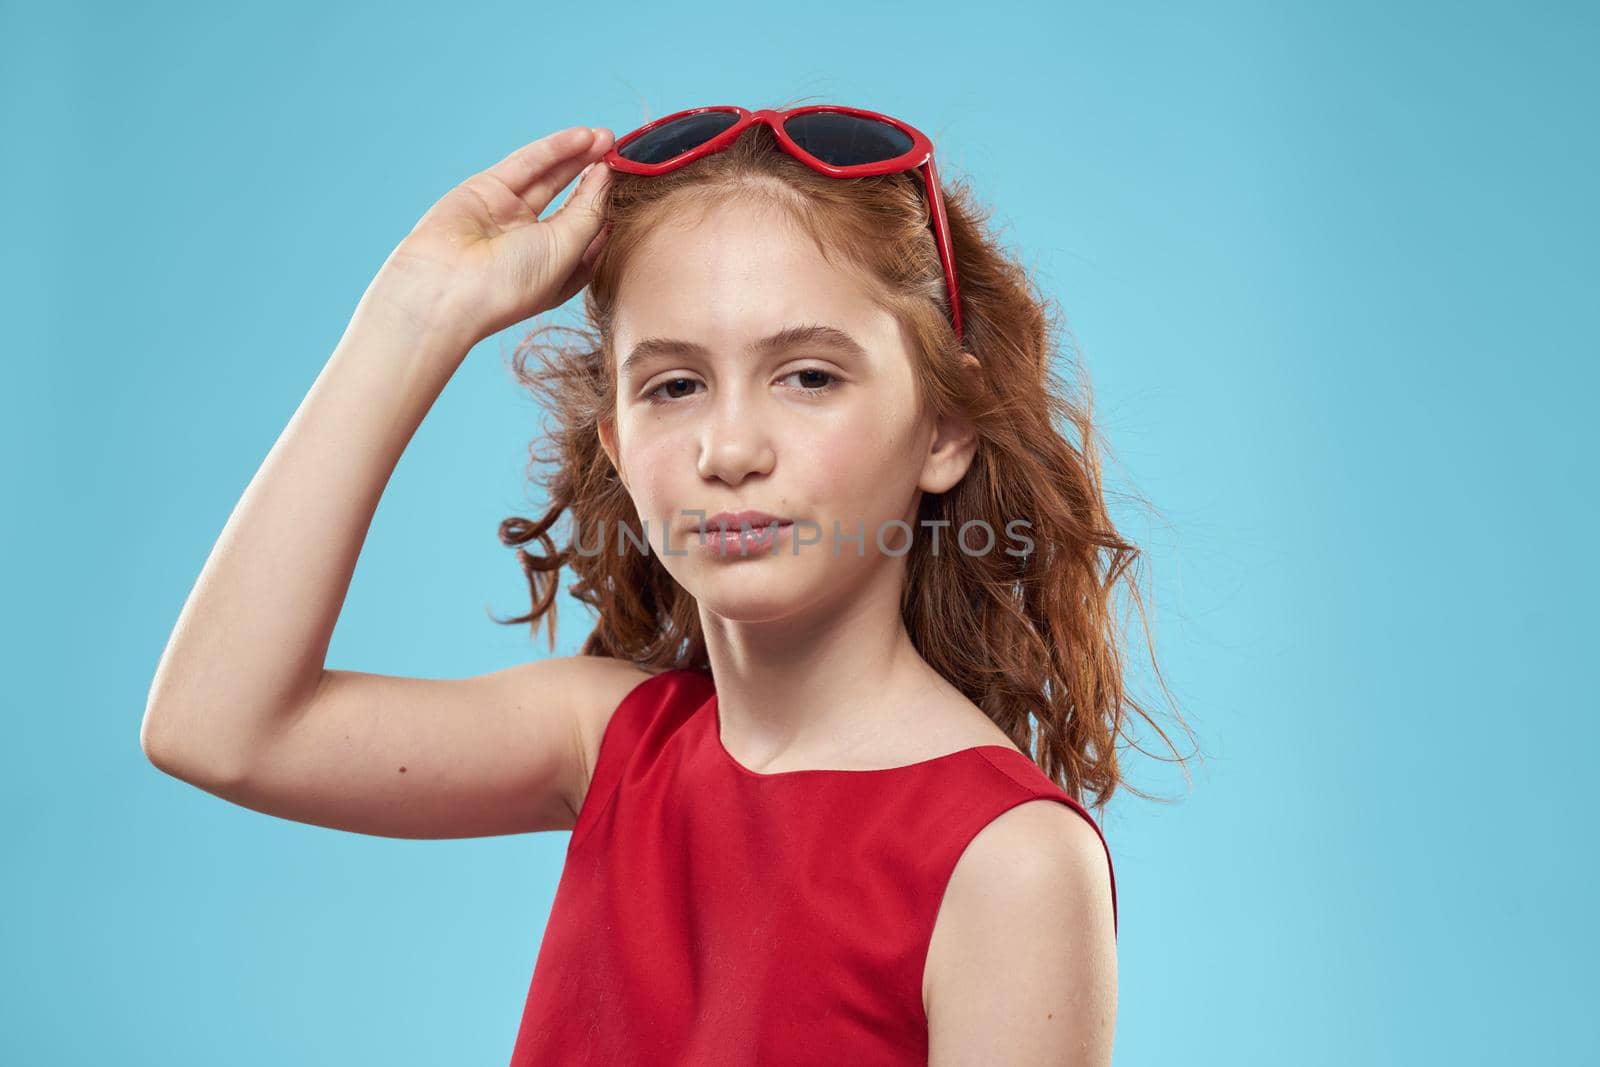 girl with curly hair sunglasses red dress and childhood fun blue background by SHOTPRIME